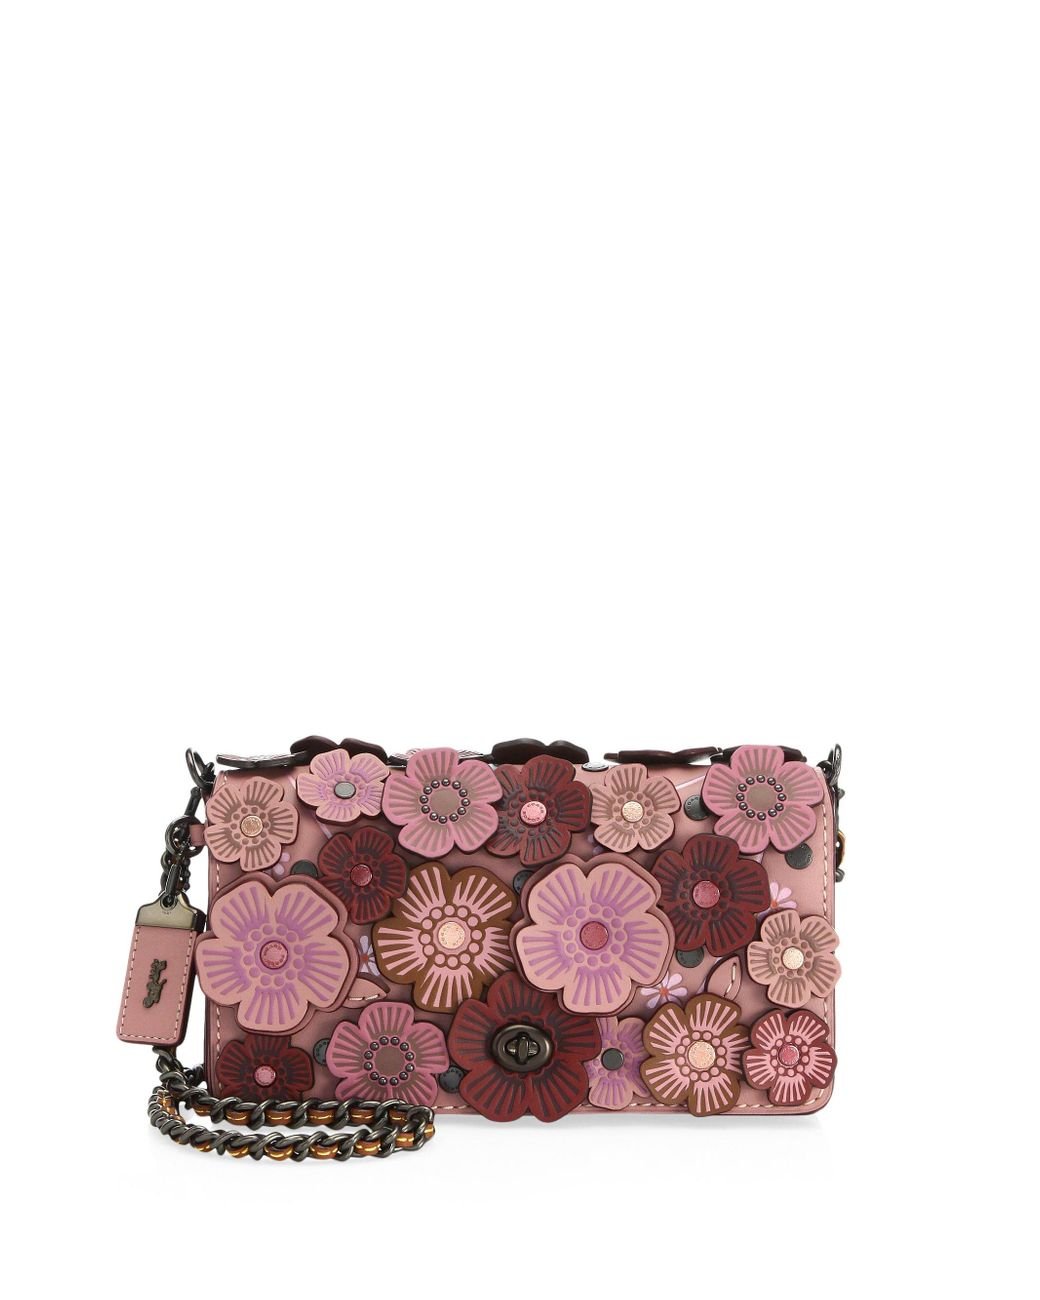 COACH Tea Rose Applique Leather Crossbody Bag in Pink | Lyst